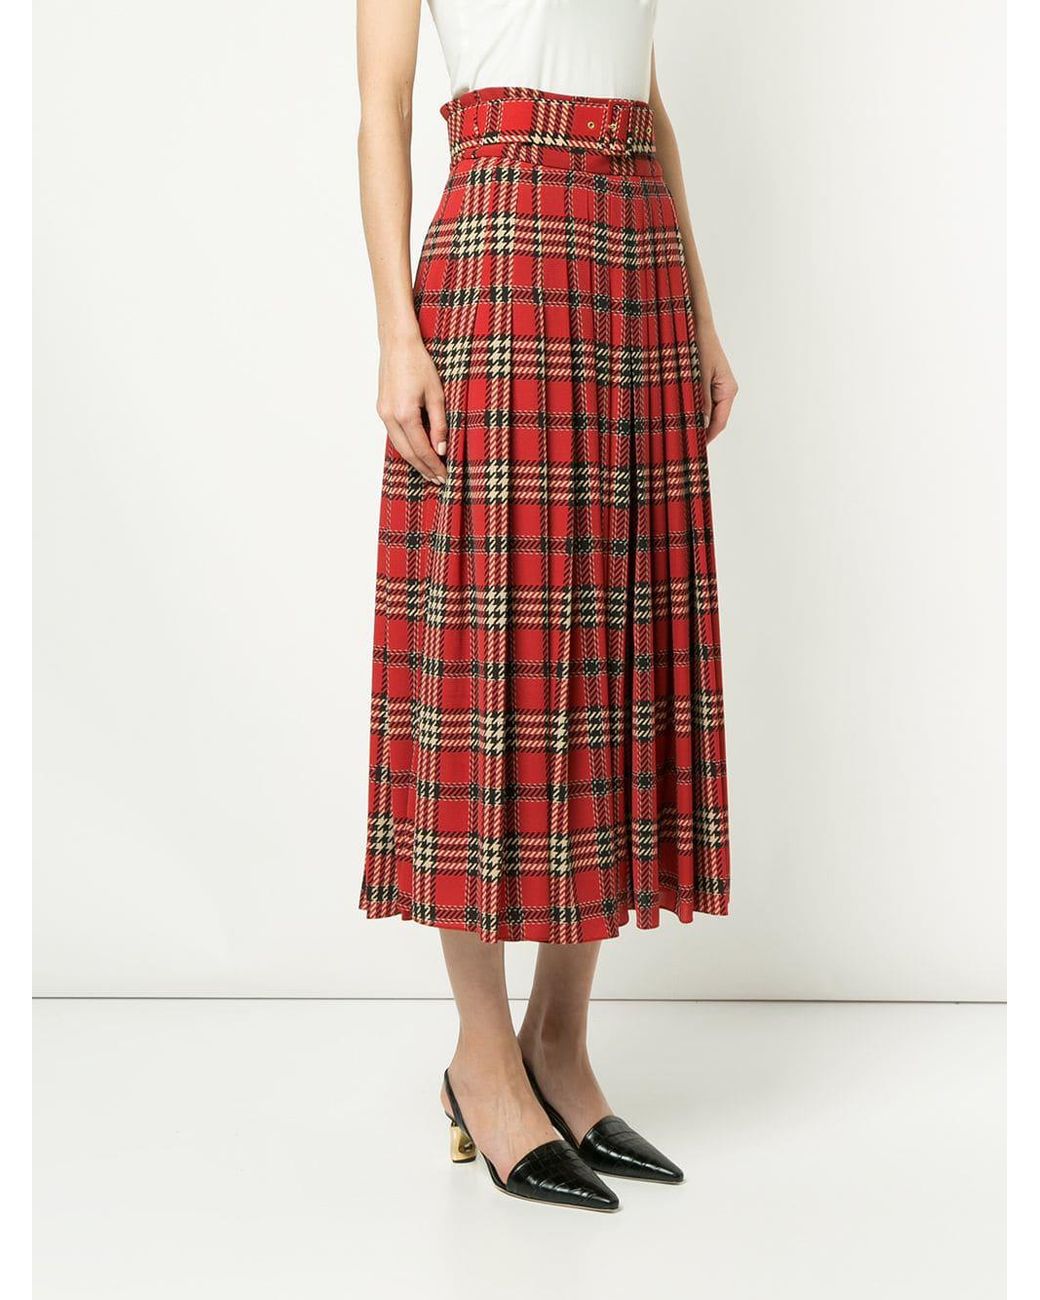 Red plaid skirt outfits on Pinterest